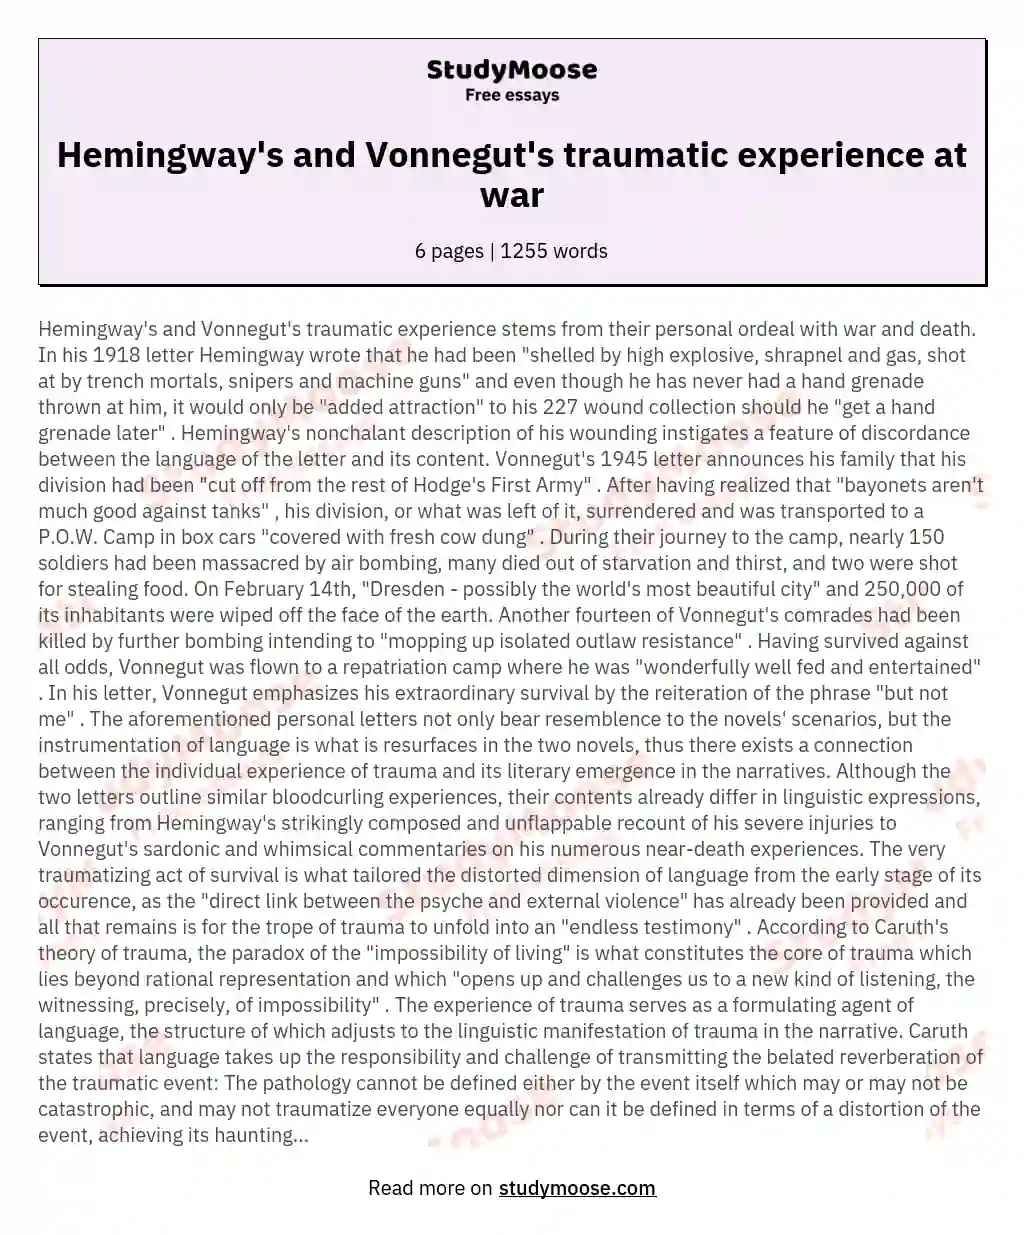 Hemingway's and Vonnegut's traumatic experience at war